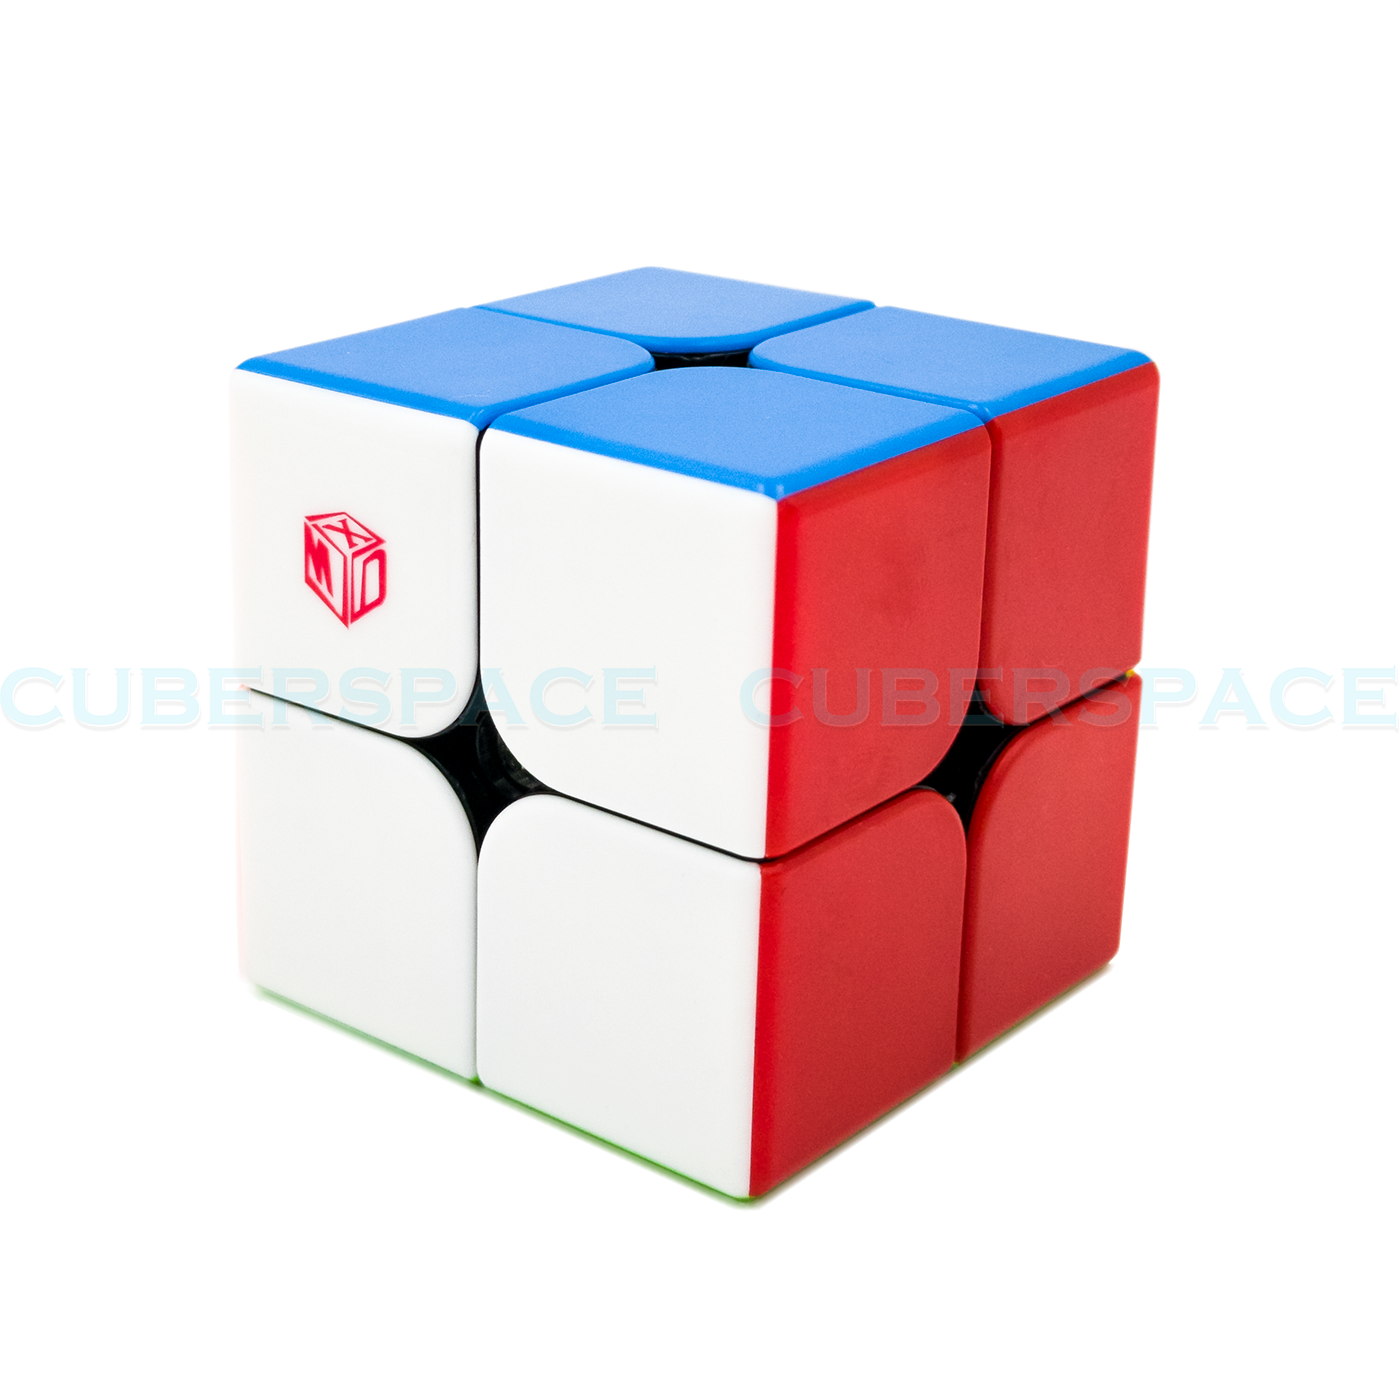 X-Man Design flare 2x2 M Cube Only